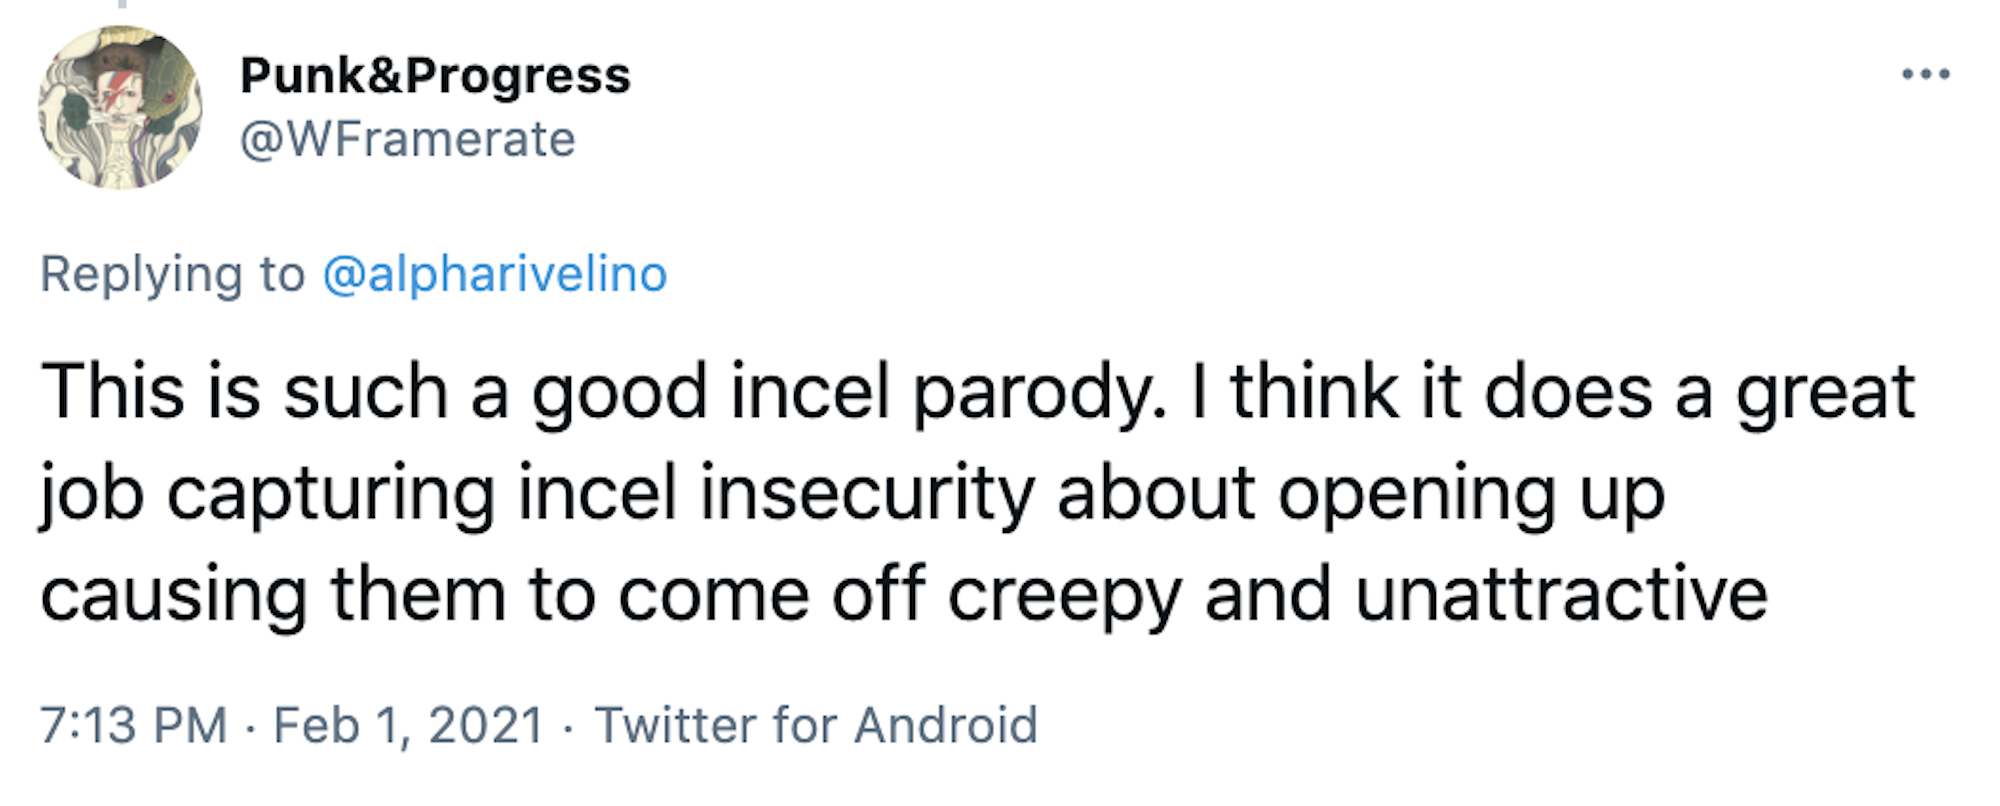 This is such a good incel parody. I think it does a great job capturing incel insecurity about opening up causing them to come off creepy and unattractive